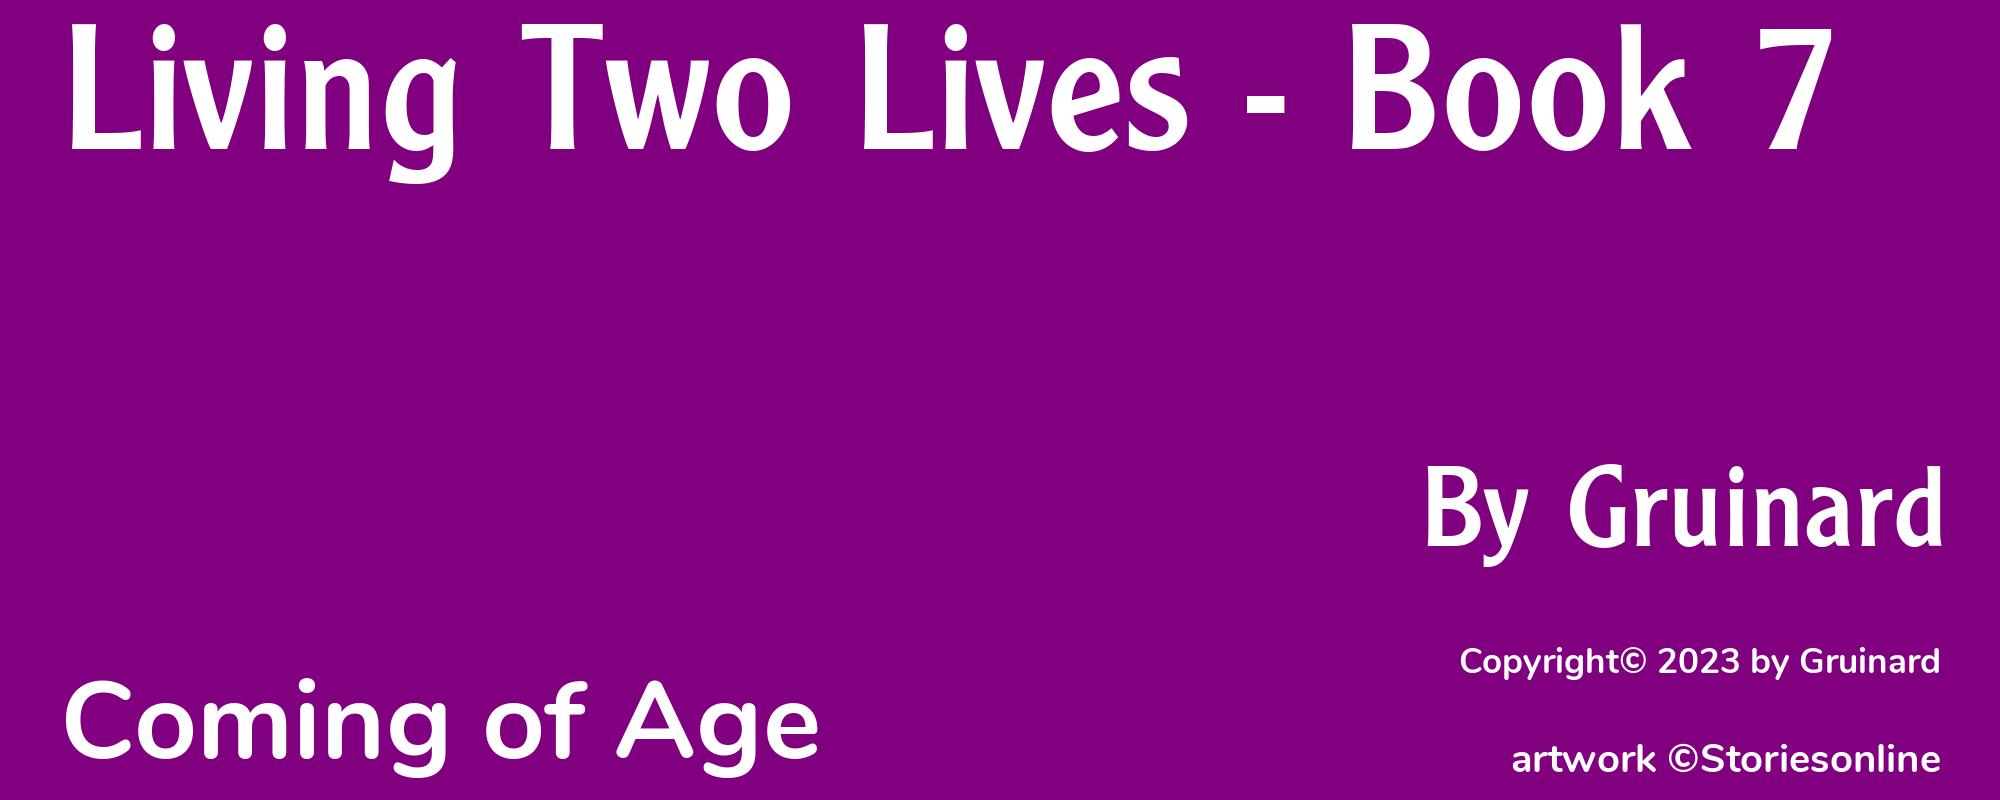 Living Two Lives - Book 7 - Cover